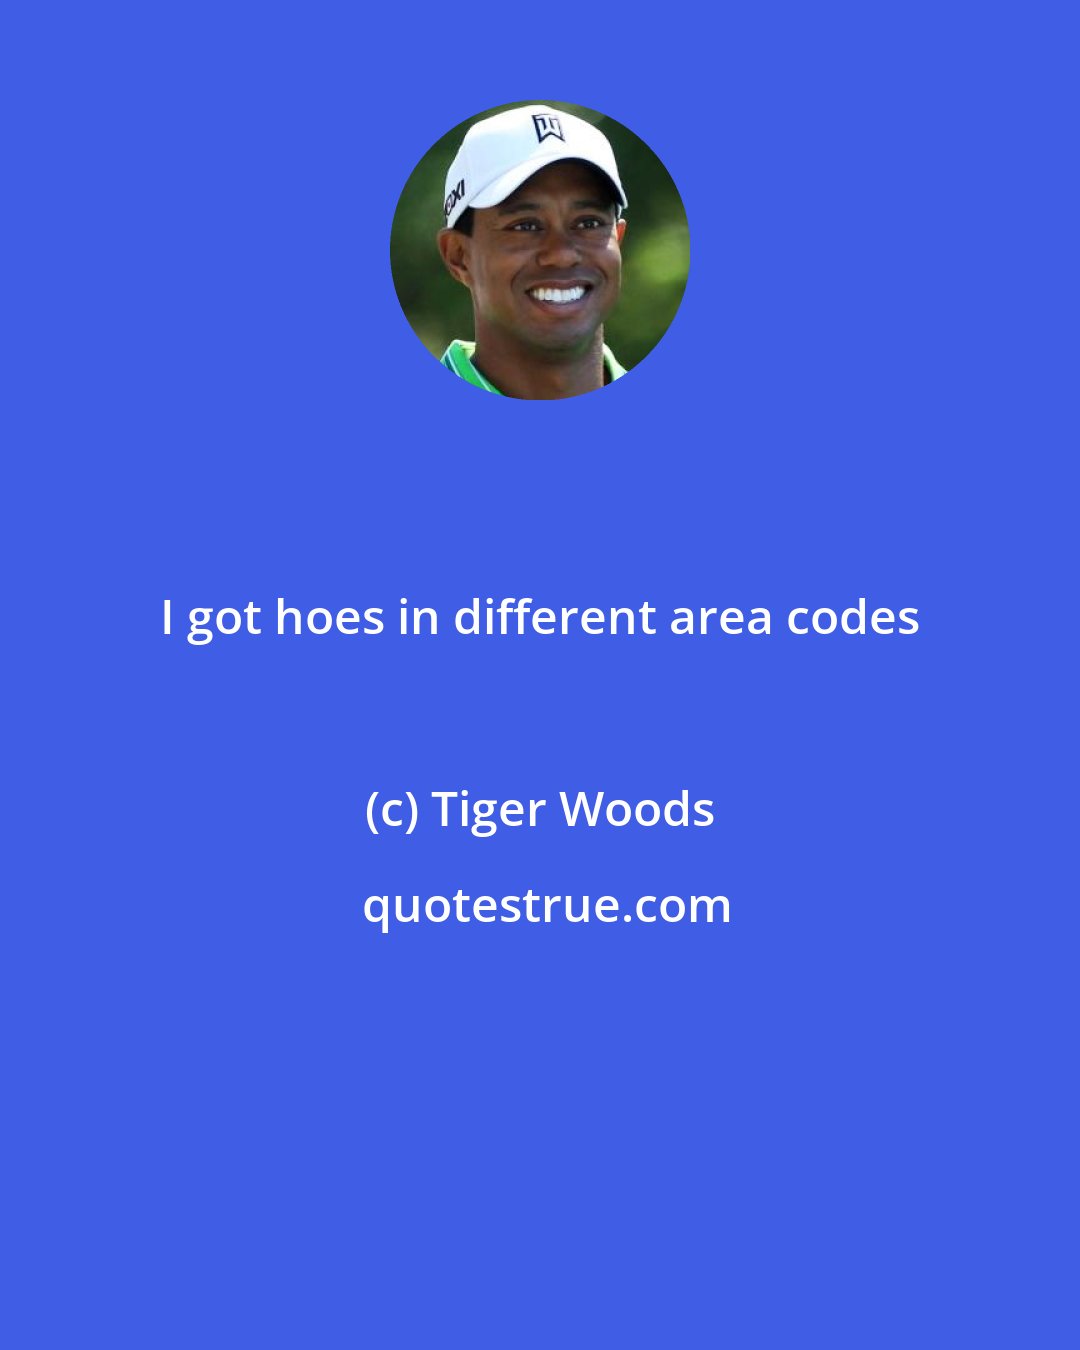 Tiger Woods: I got hoes in different area codes